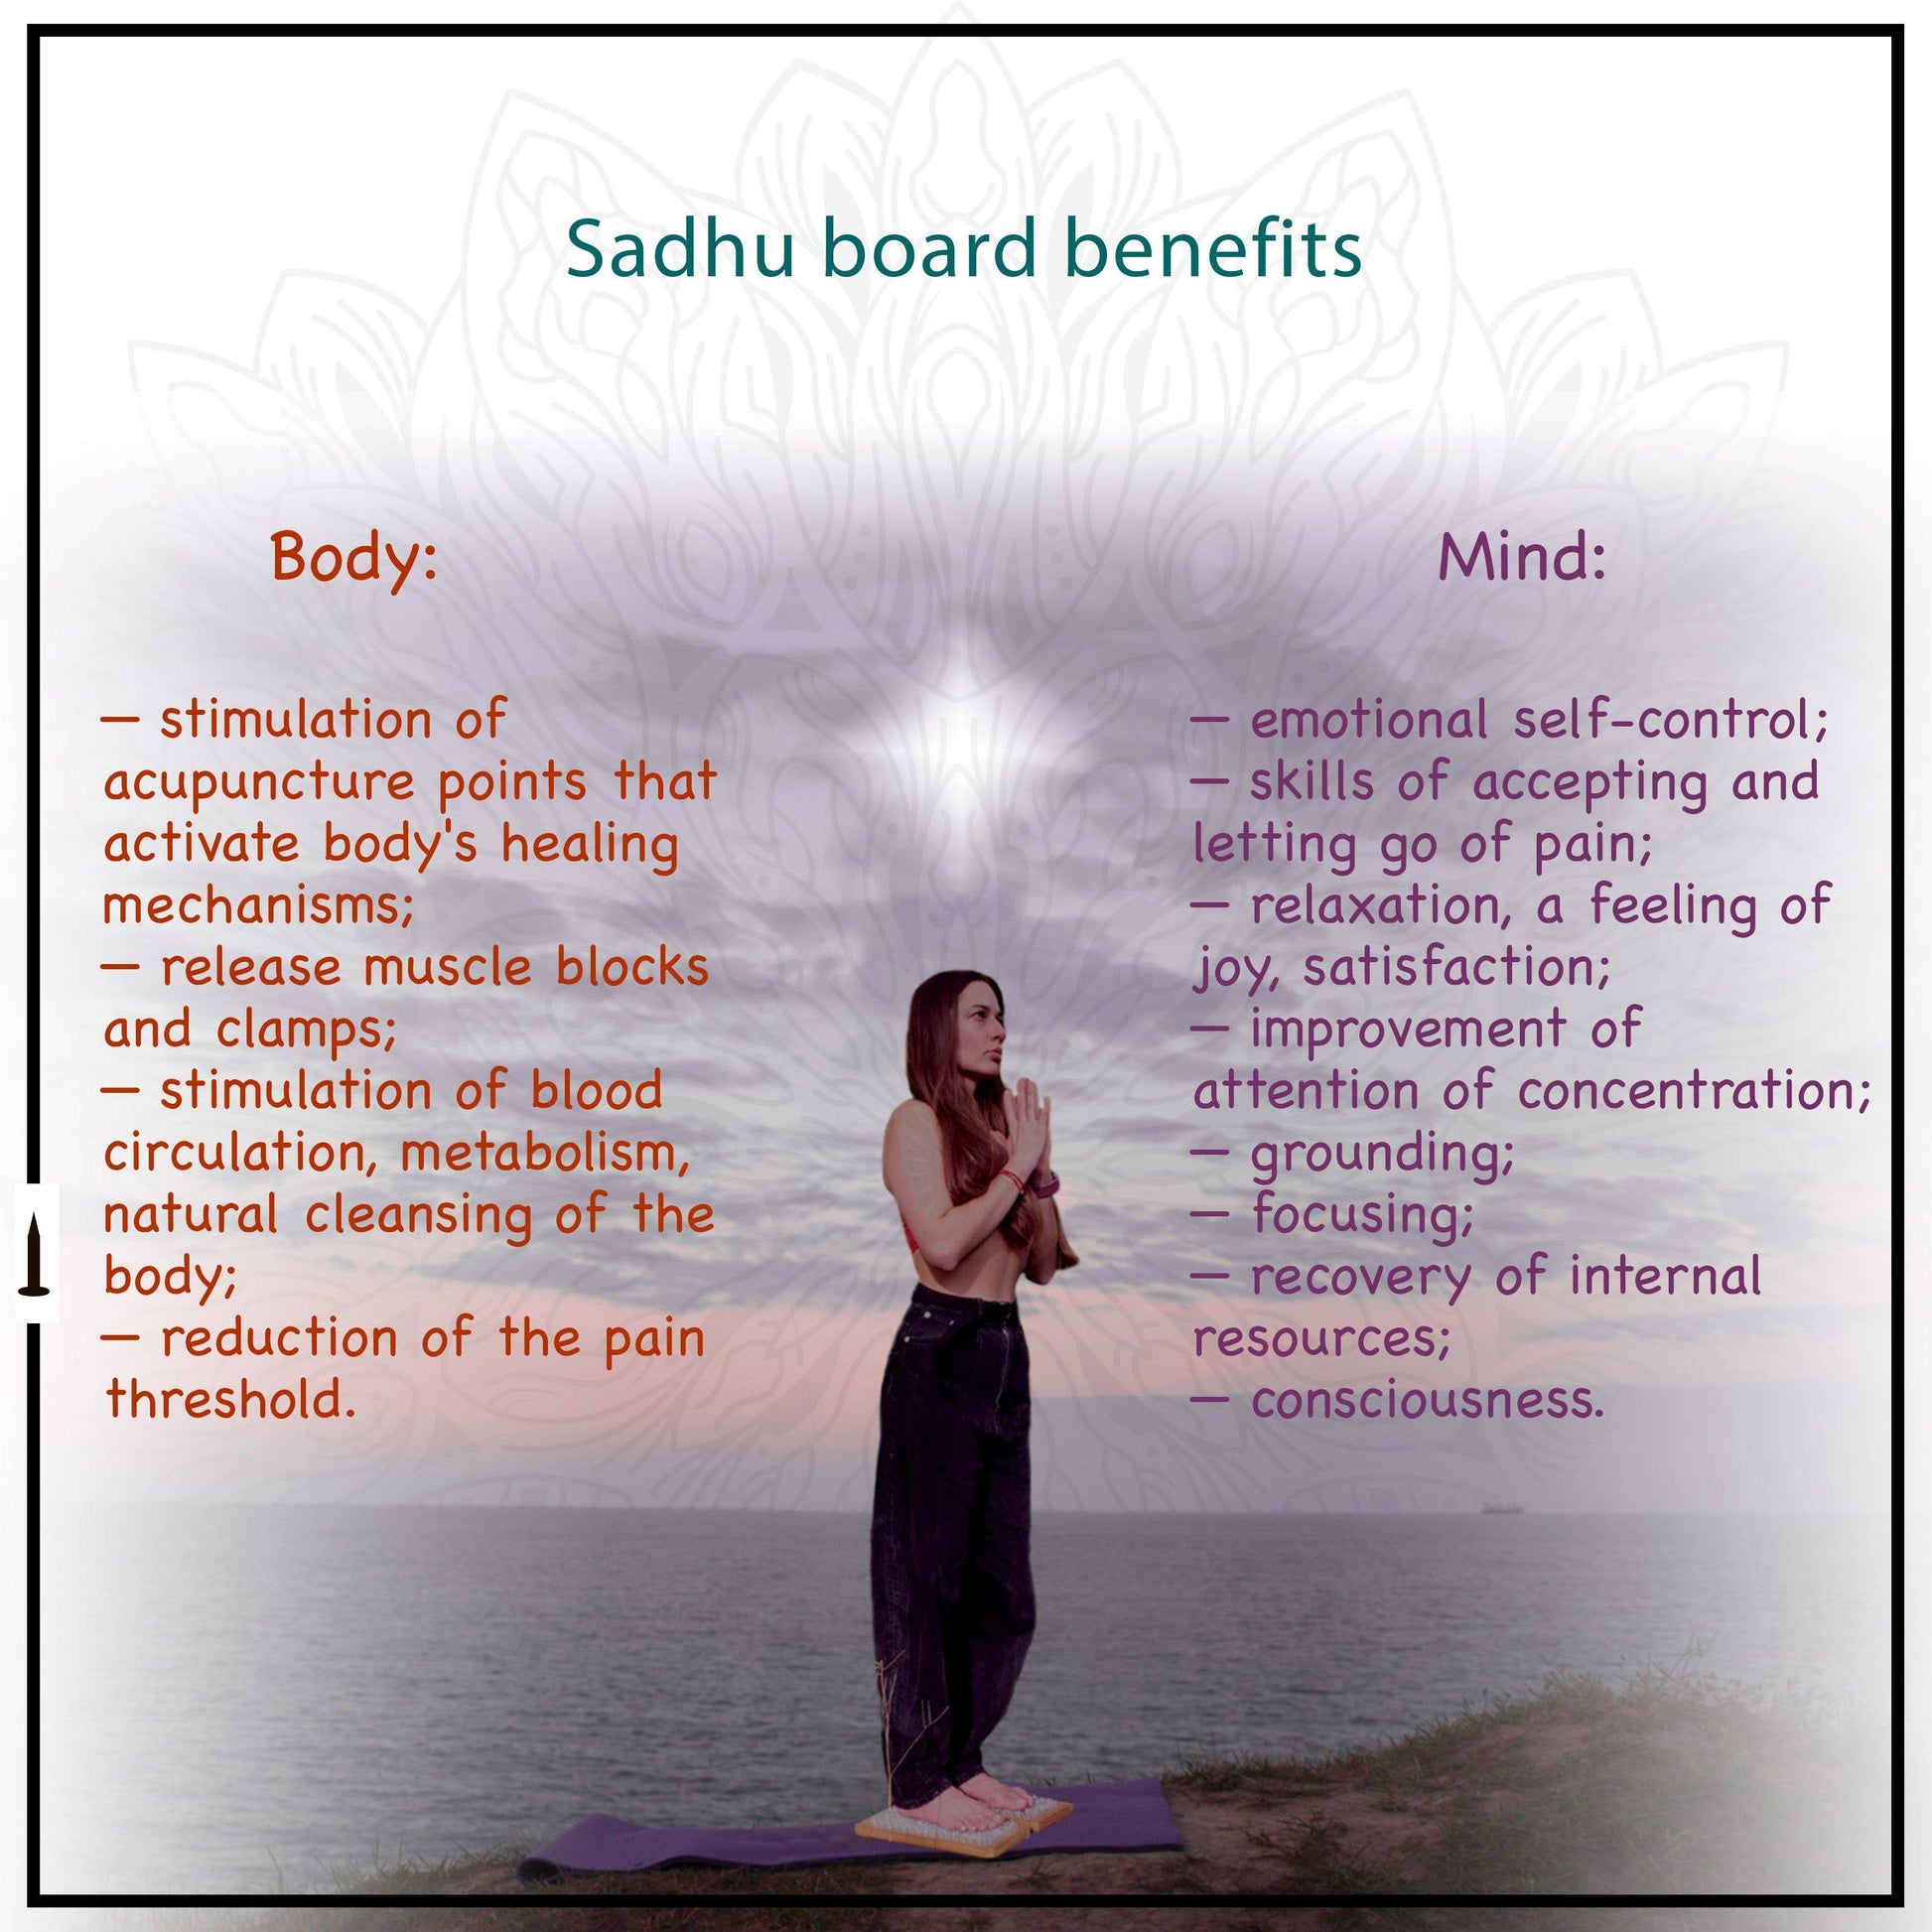 Sadhu boards benefits for body and mind